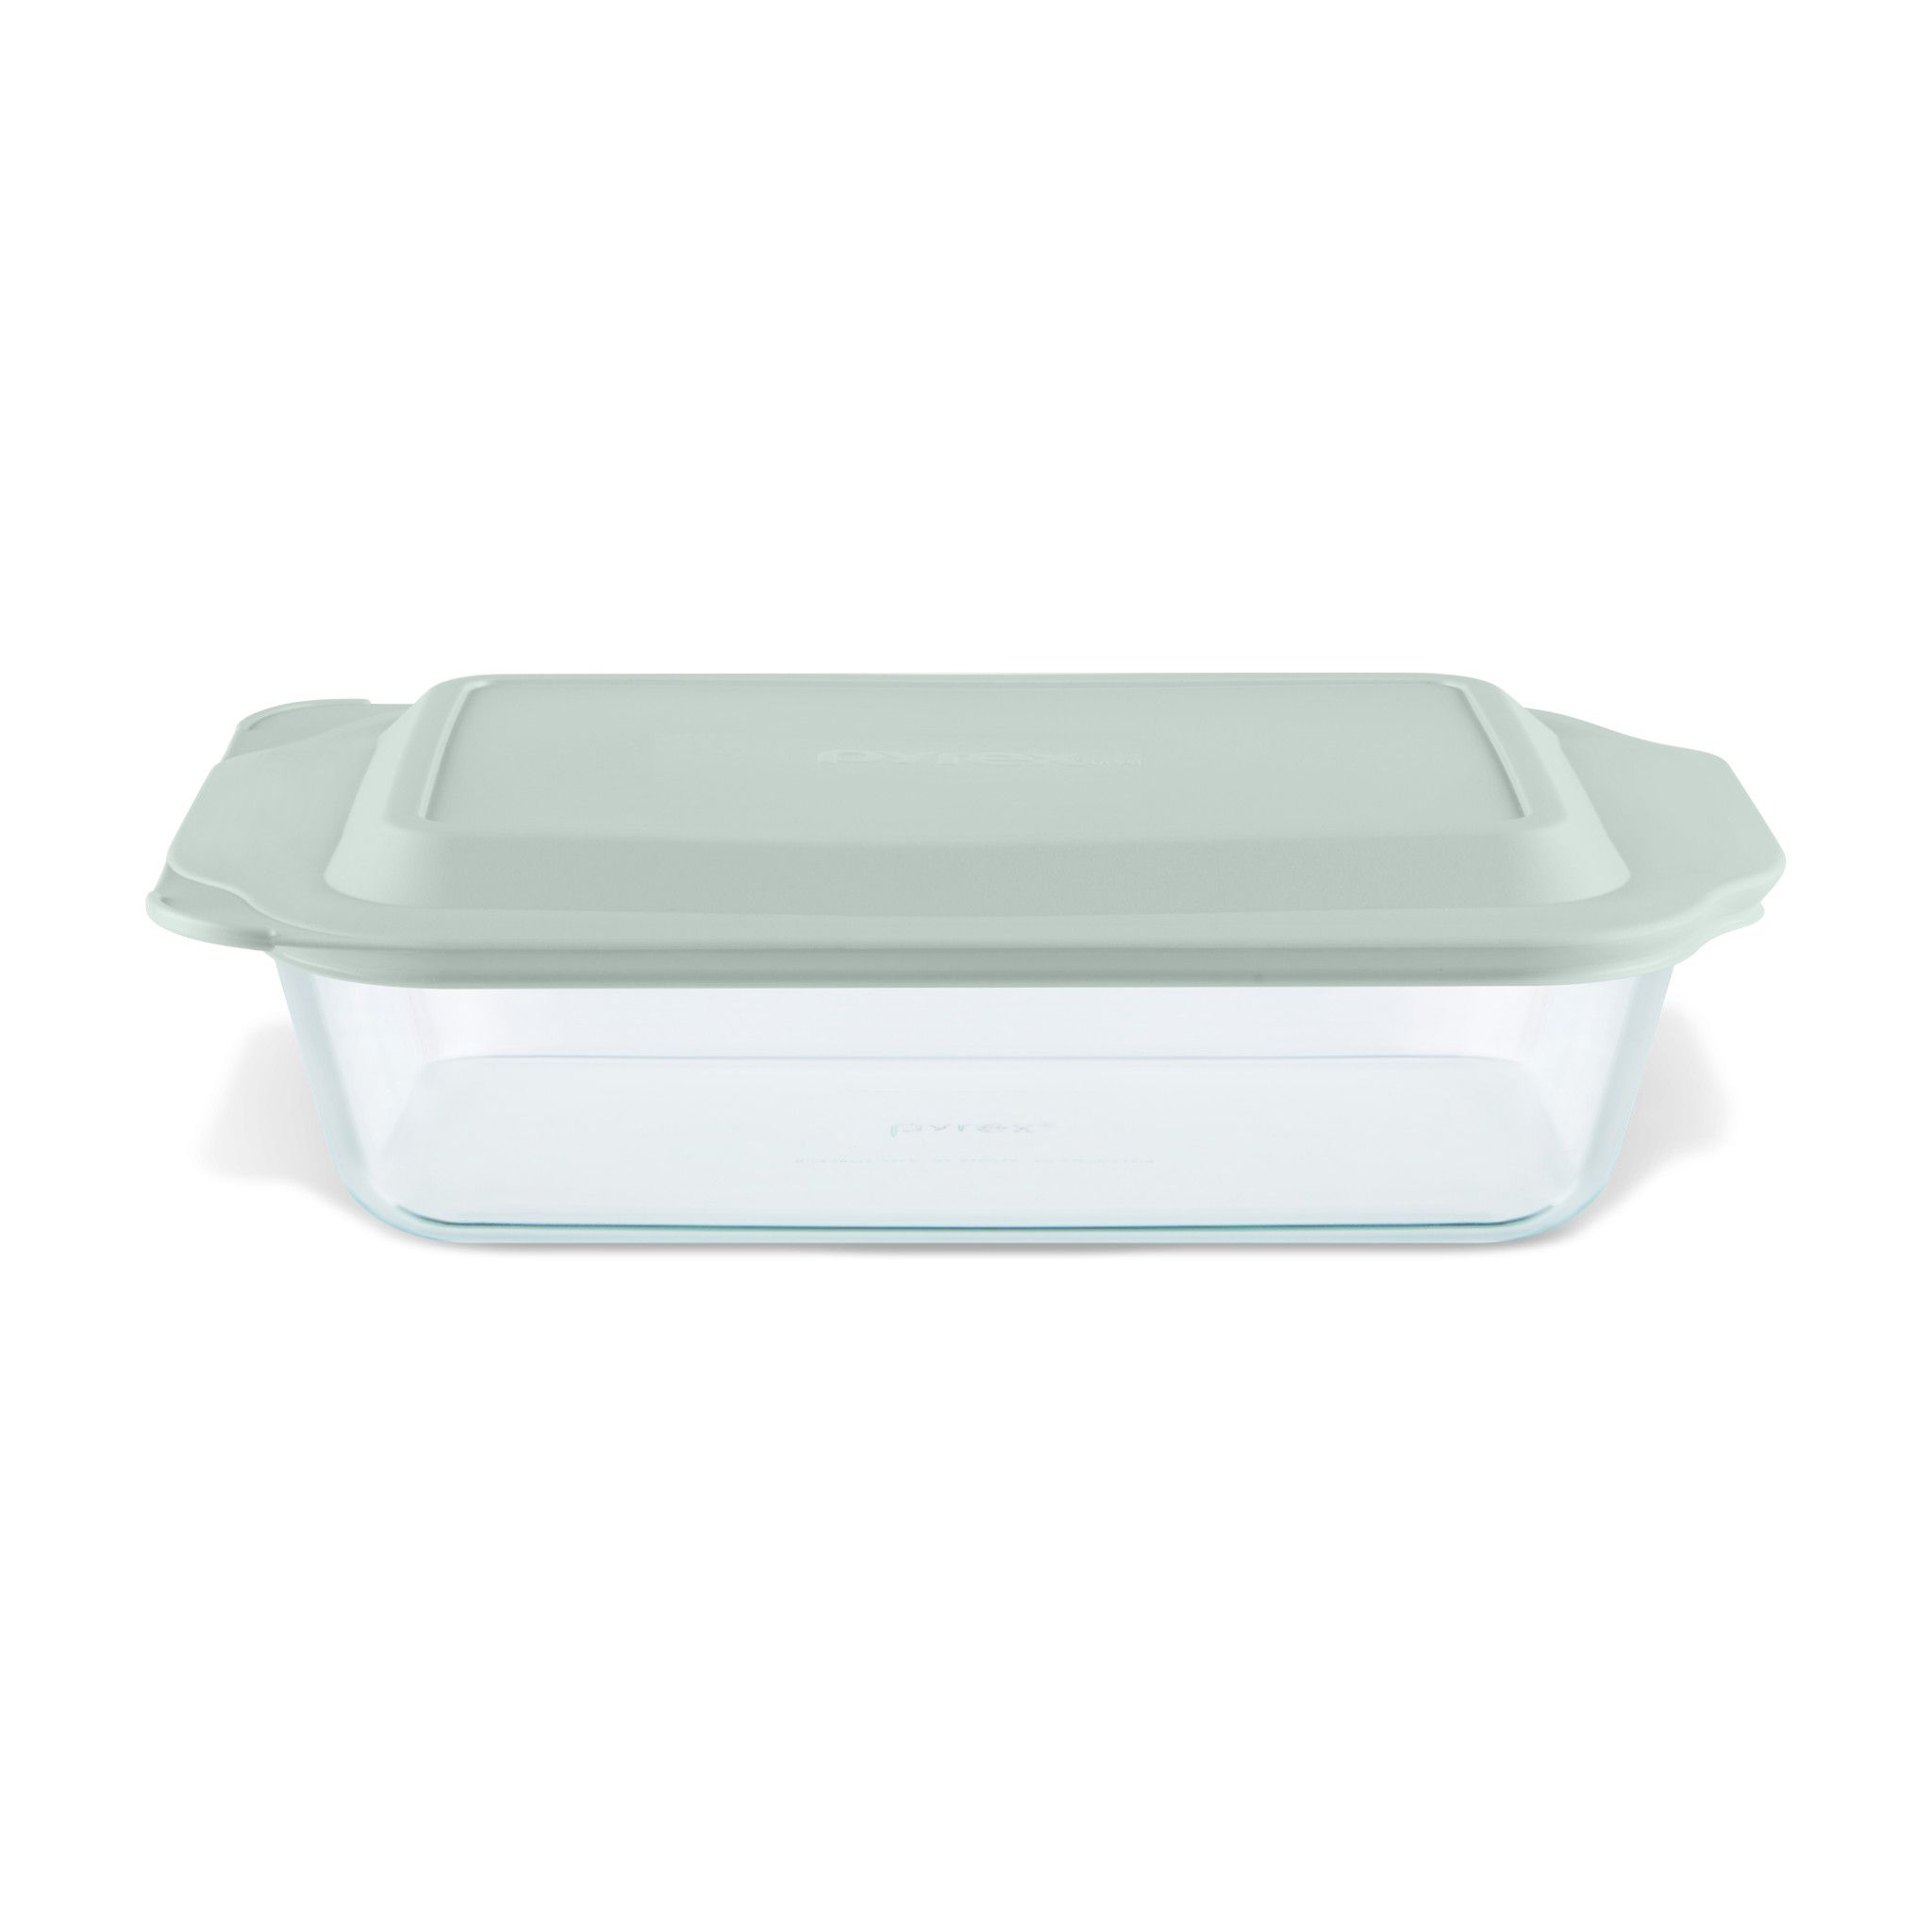 Small 3 Cup Pyrex Baking Dish 7 X 5 X 1.75 Rectangle Oblong Clear Glass 